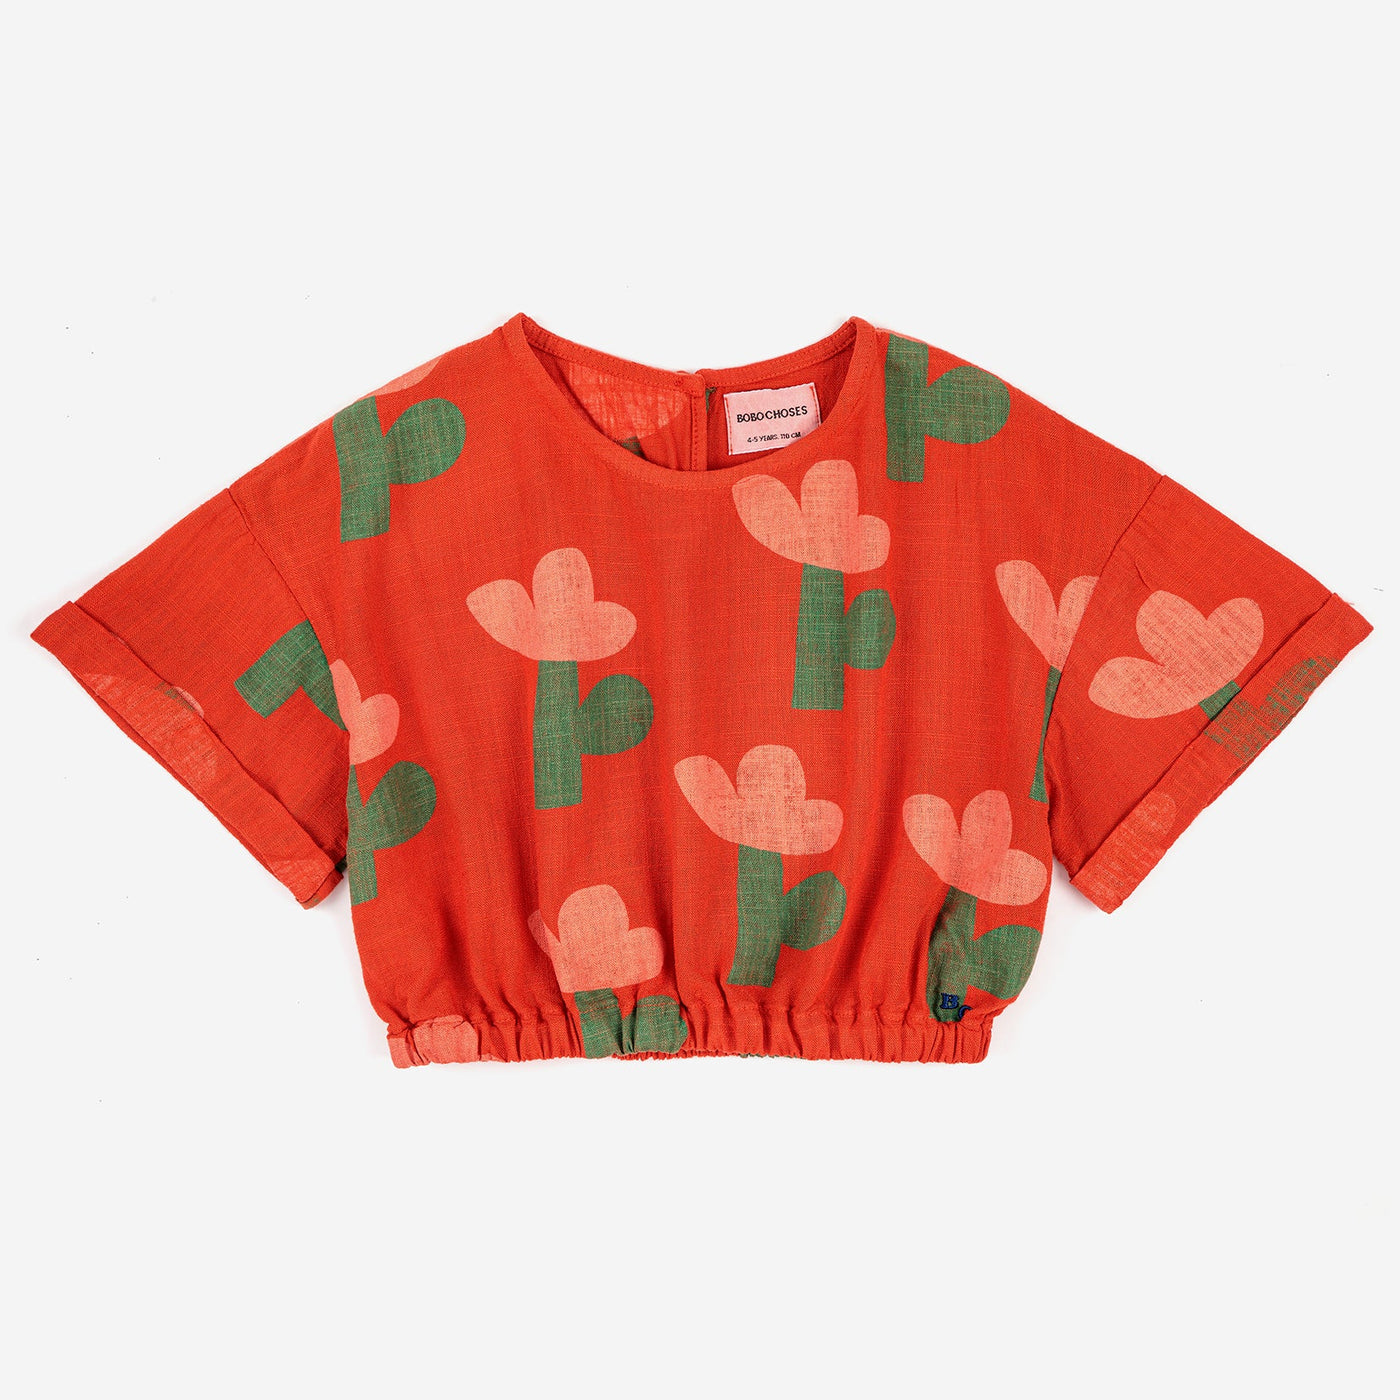 Sea Flower All Over Woven Top by Bobo Choses - Petite Belle